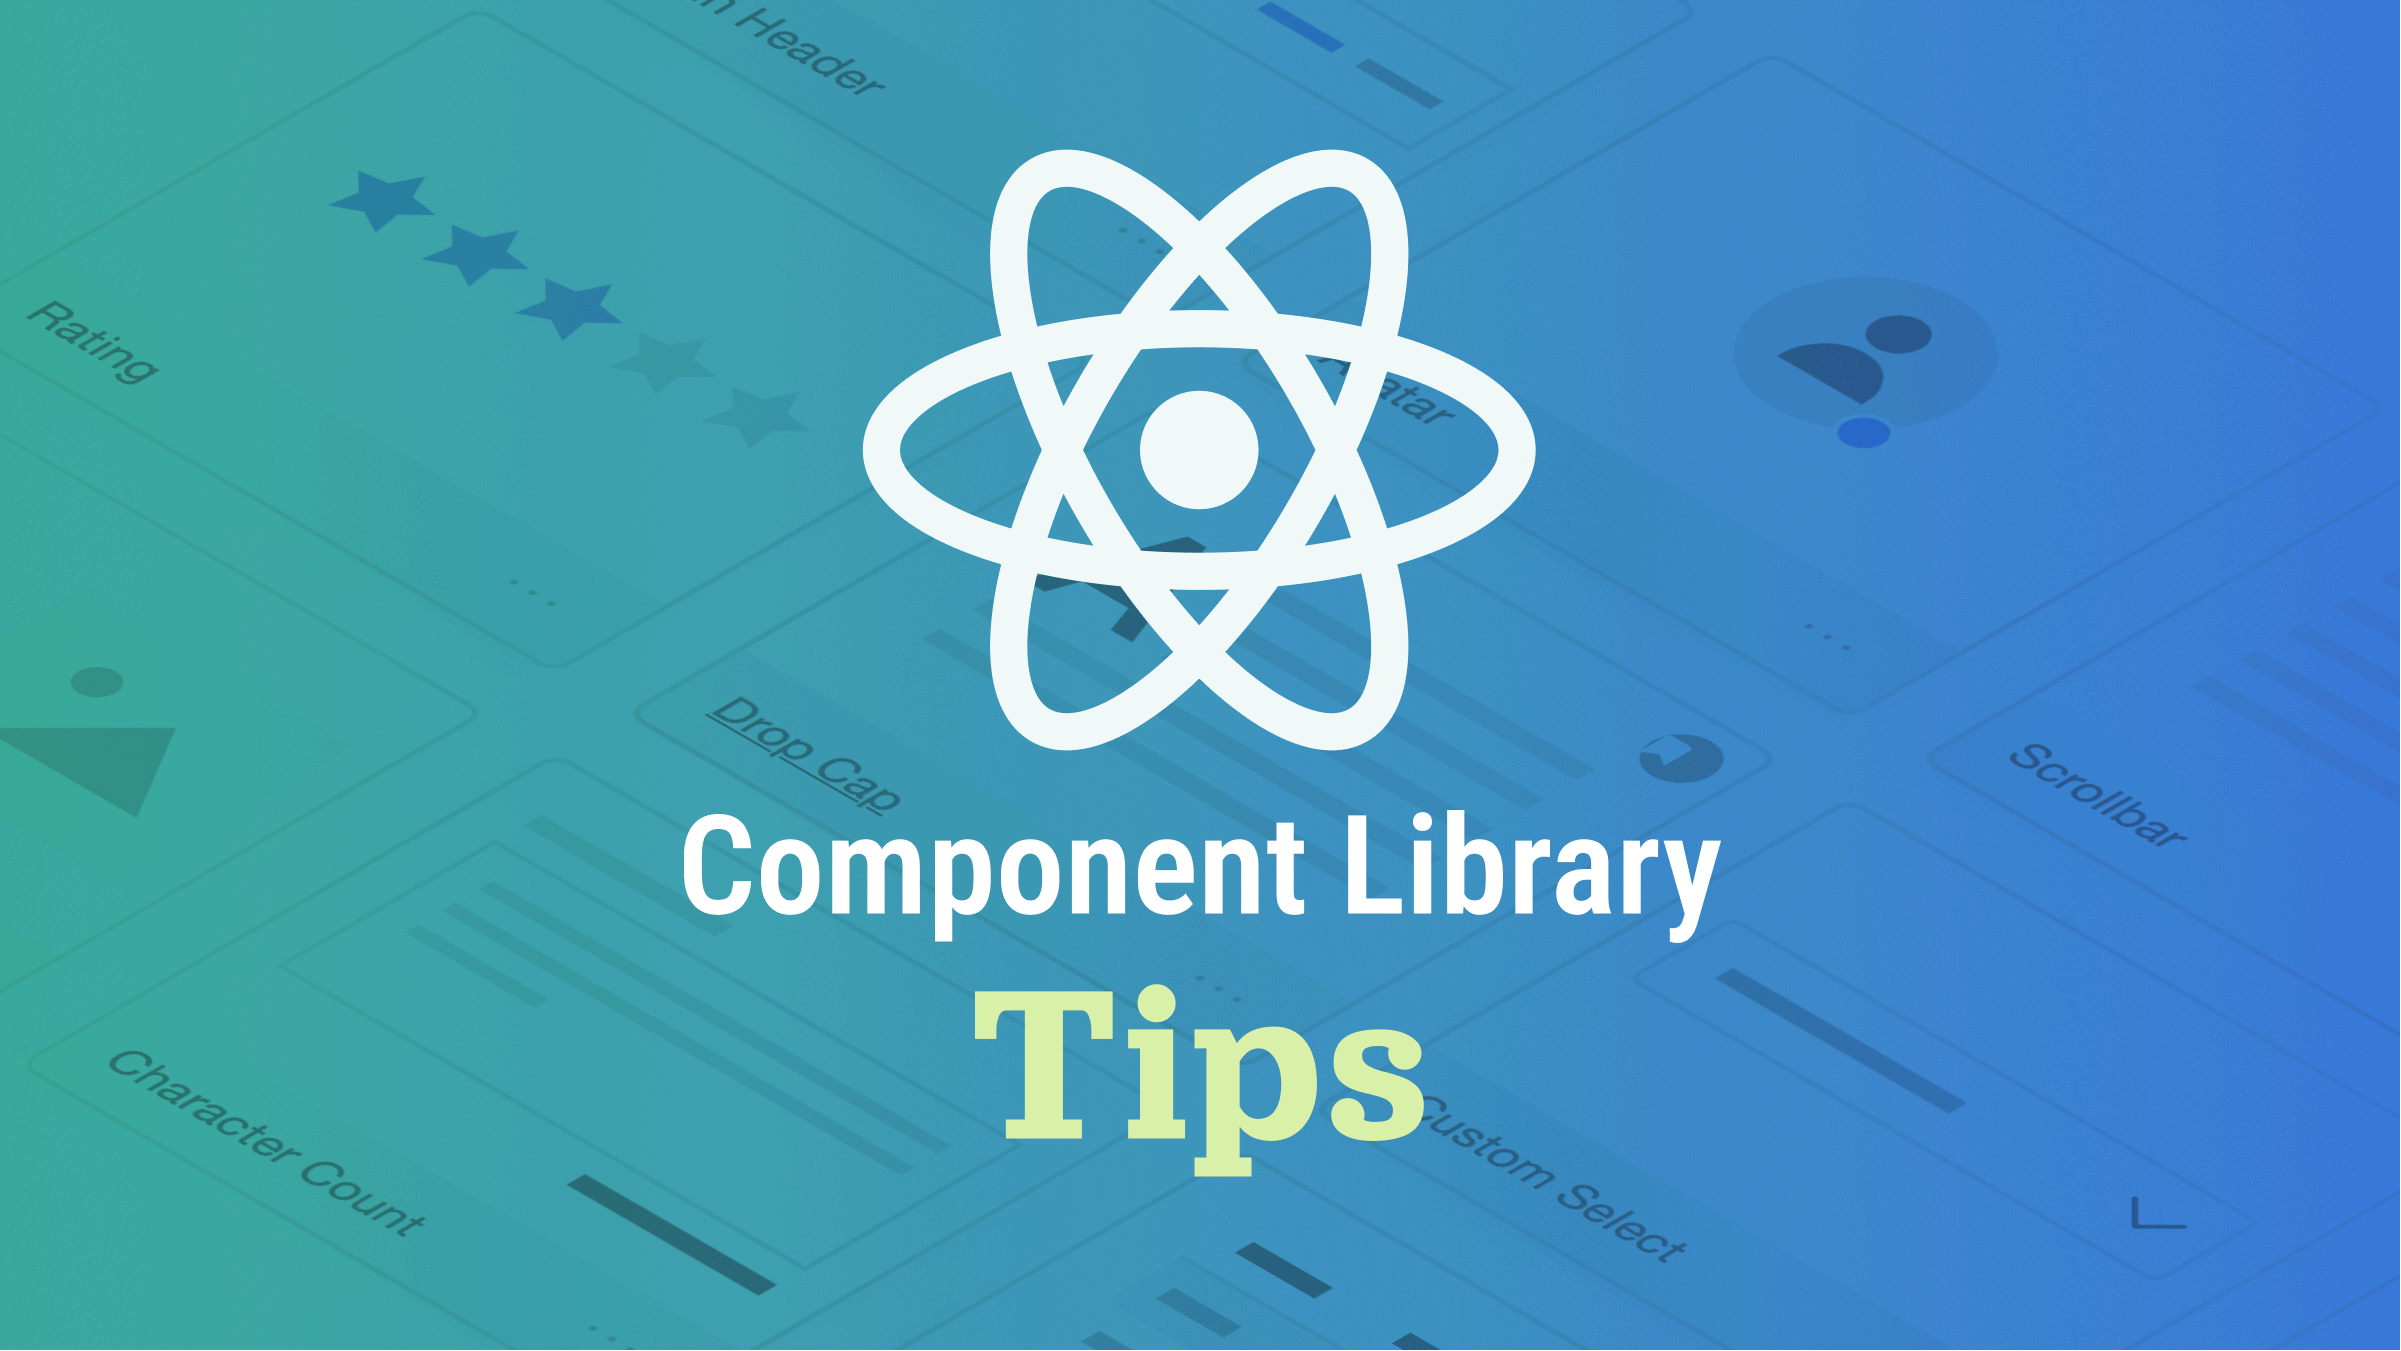 Tips for creating a component library